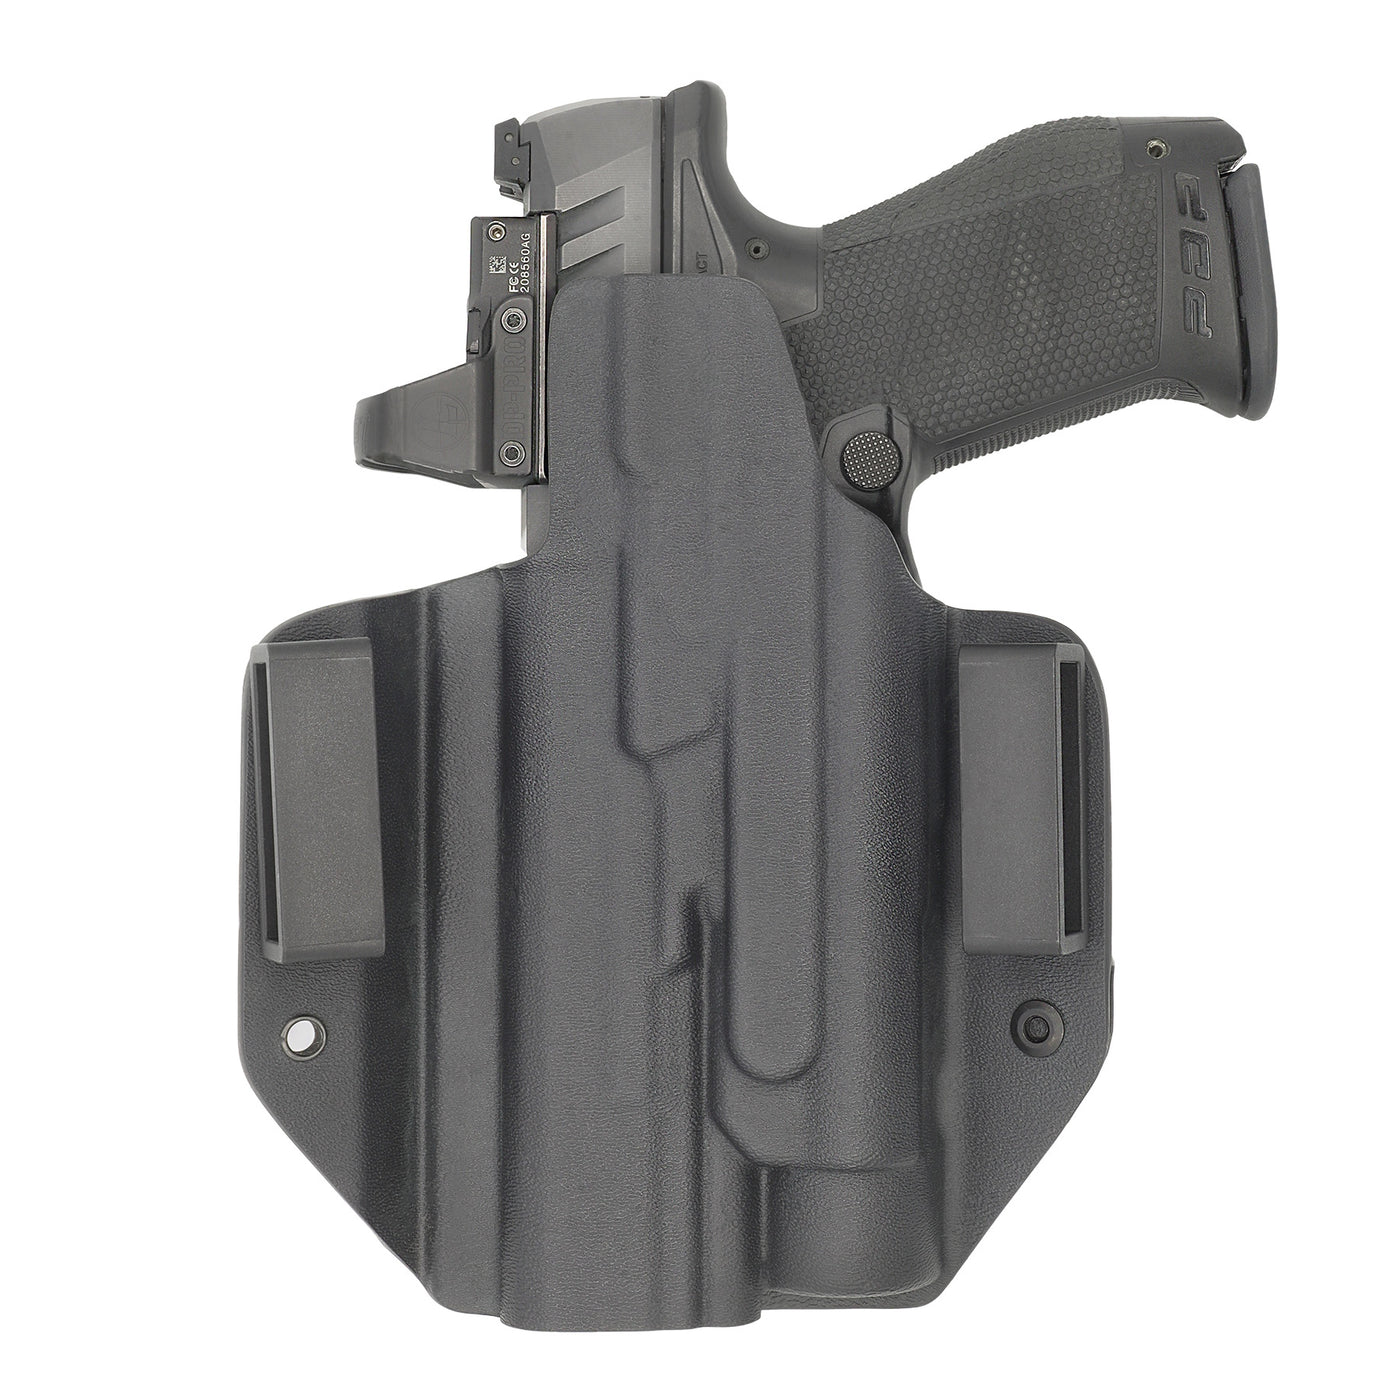 C&G Holsters custom OWB Tactical CZ Shadow 2 Streamlight TLR1 in holstered position back view